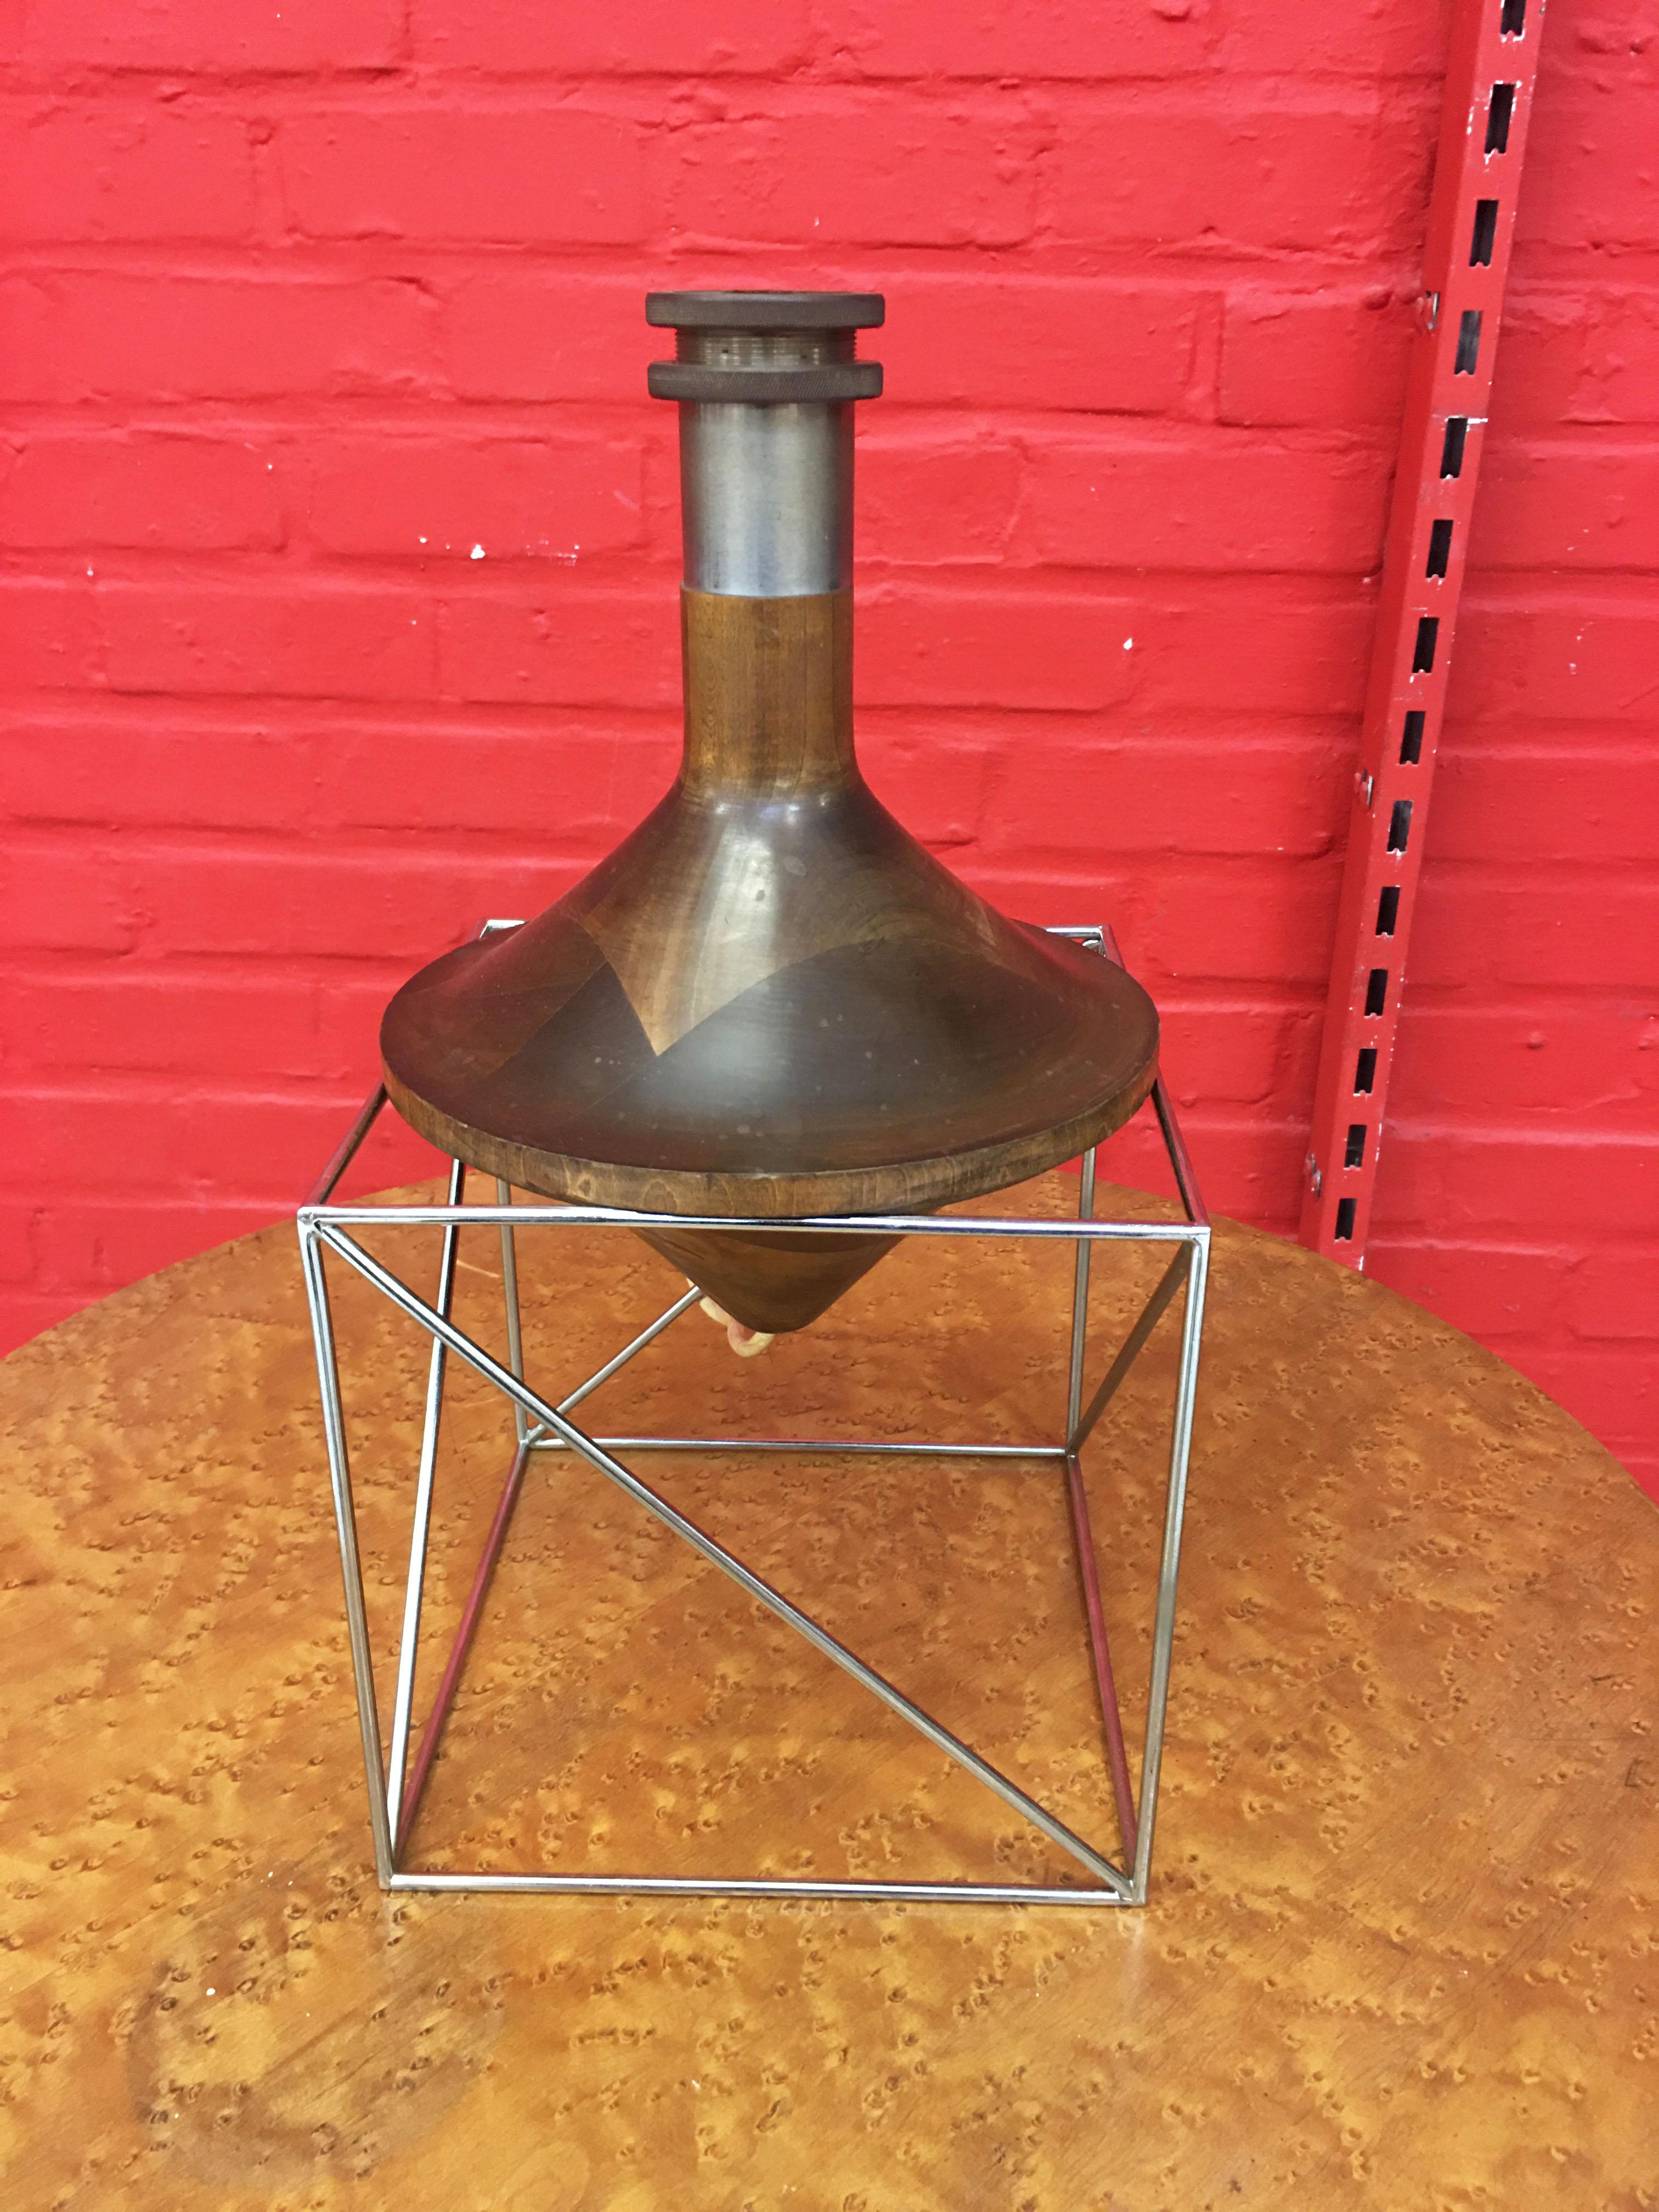 Original diabolo lamp in the style of Max Sauzé, circa 1960
assembly of different woods for the diabolo, which rests on a chrome metal structure.